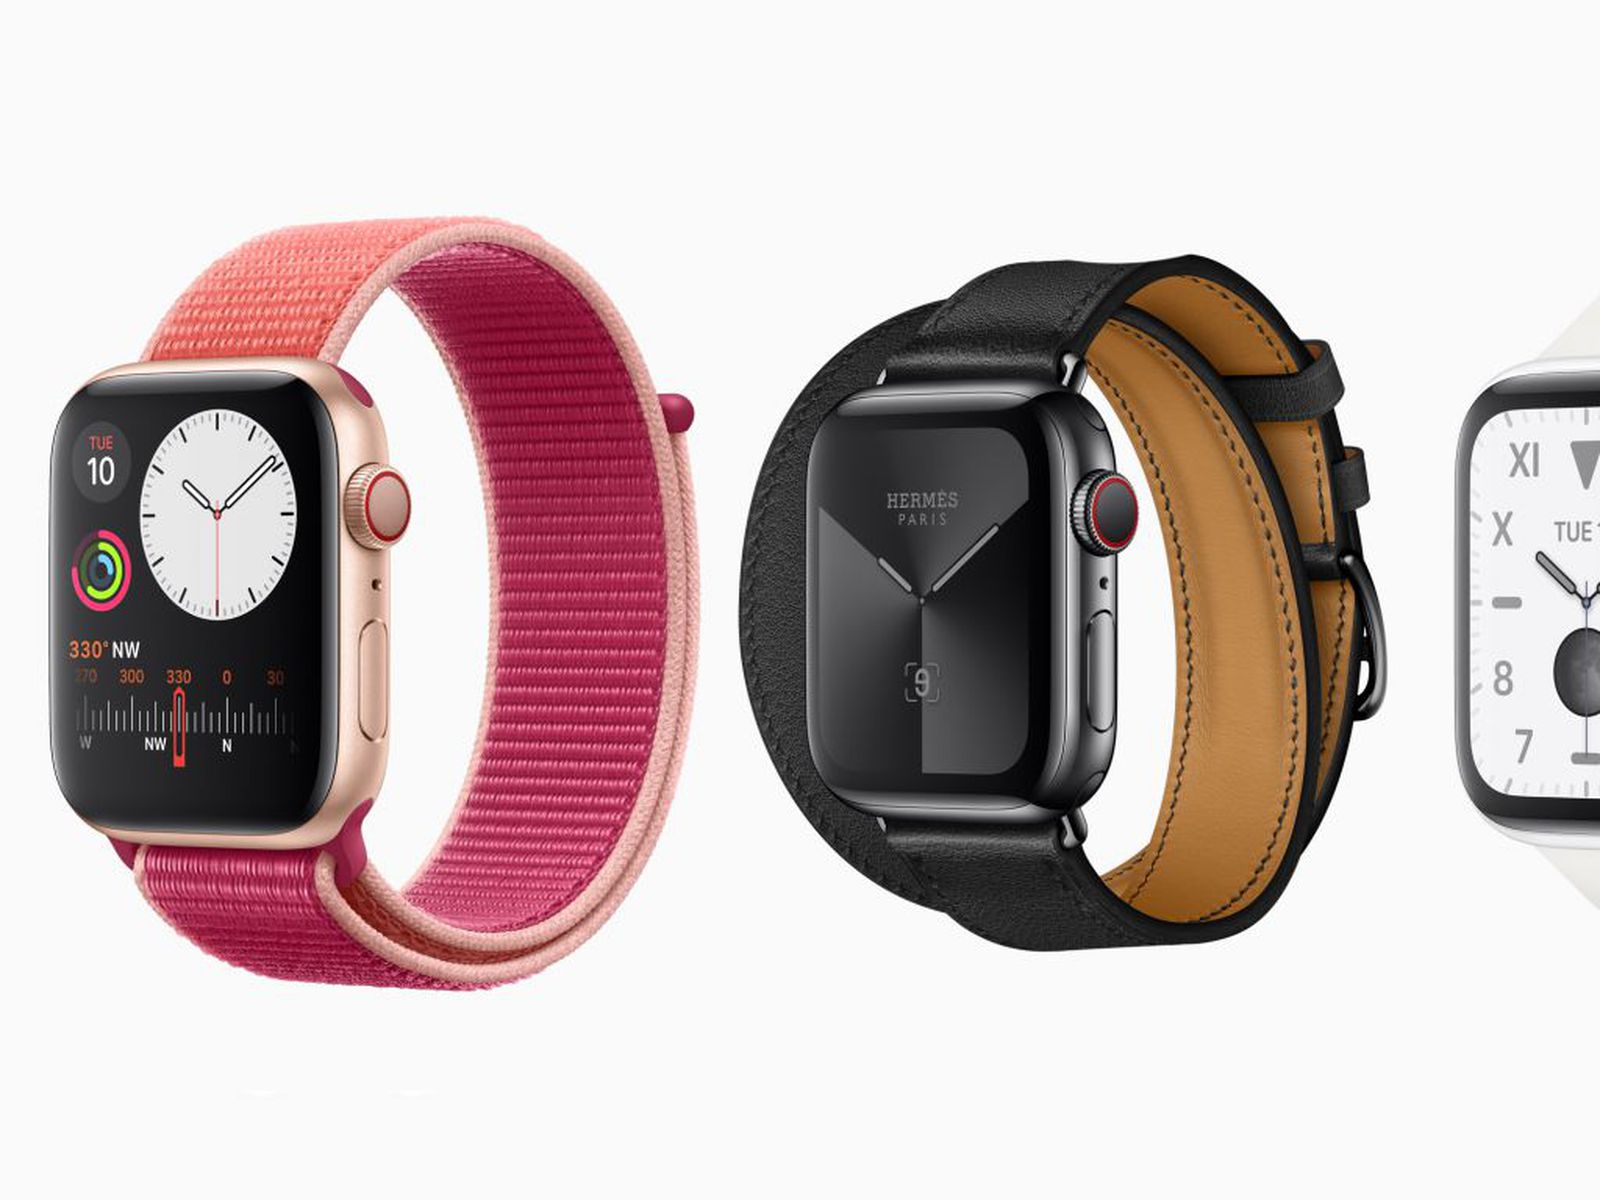 Apple Watch Series 5 Models Offer 32gb Of Storage Up From 16gb In